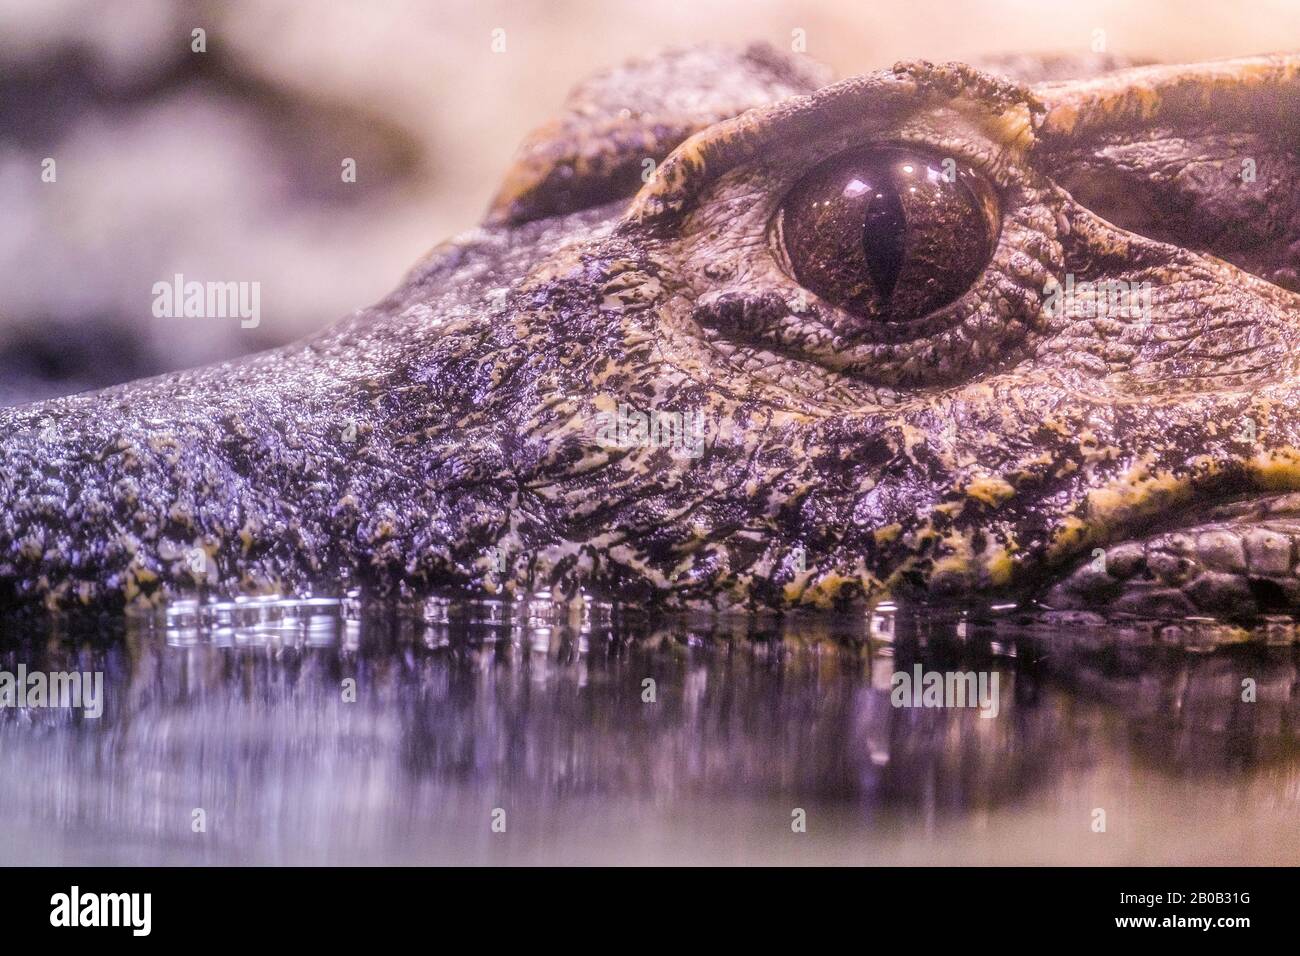 A close-up shot of a water crocodile (Crocodylus porosus) with reflection in the water Stock Photo